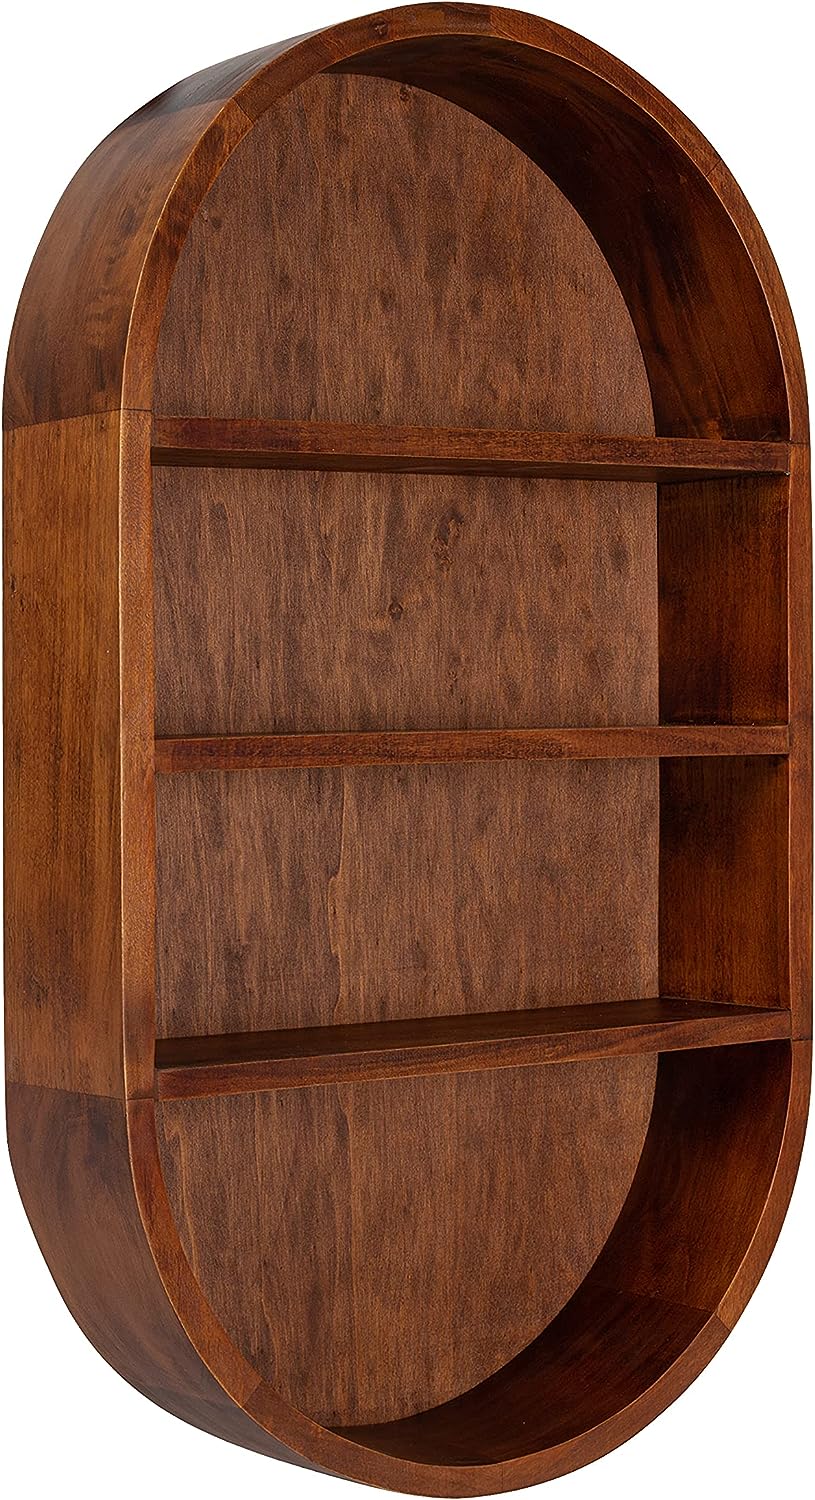 Kate and Laurel Hutton Midcentury Capsule Wall Shelf, 16 x 28, Walnut Brown, Geometric Decorative Shelves for Wall